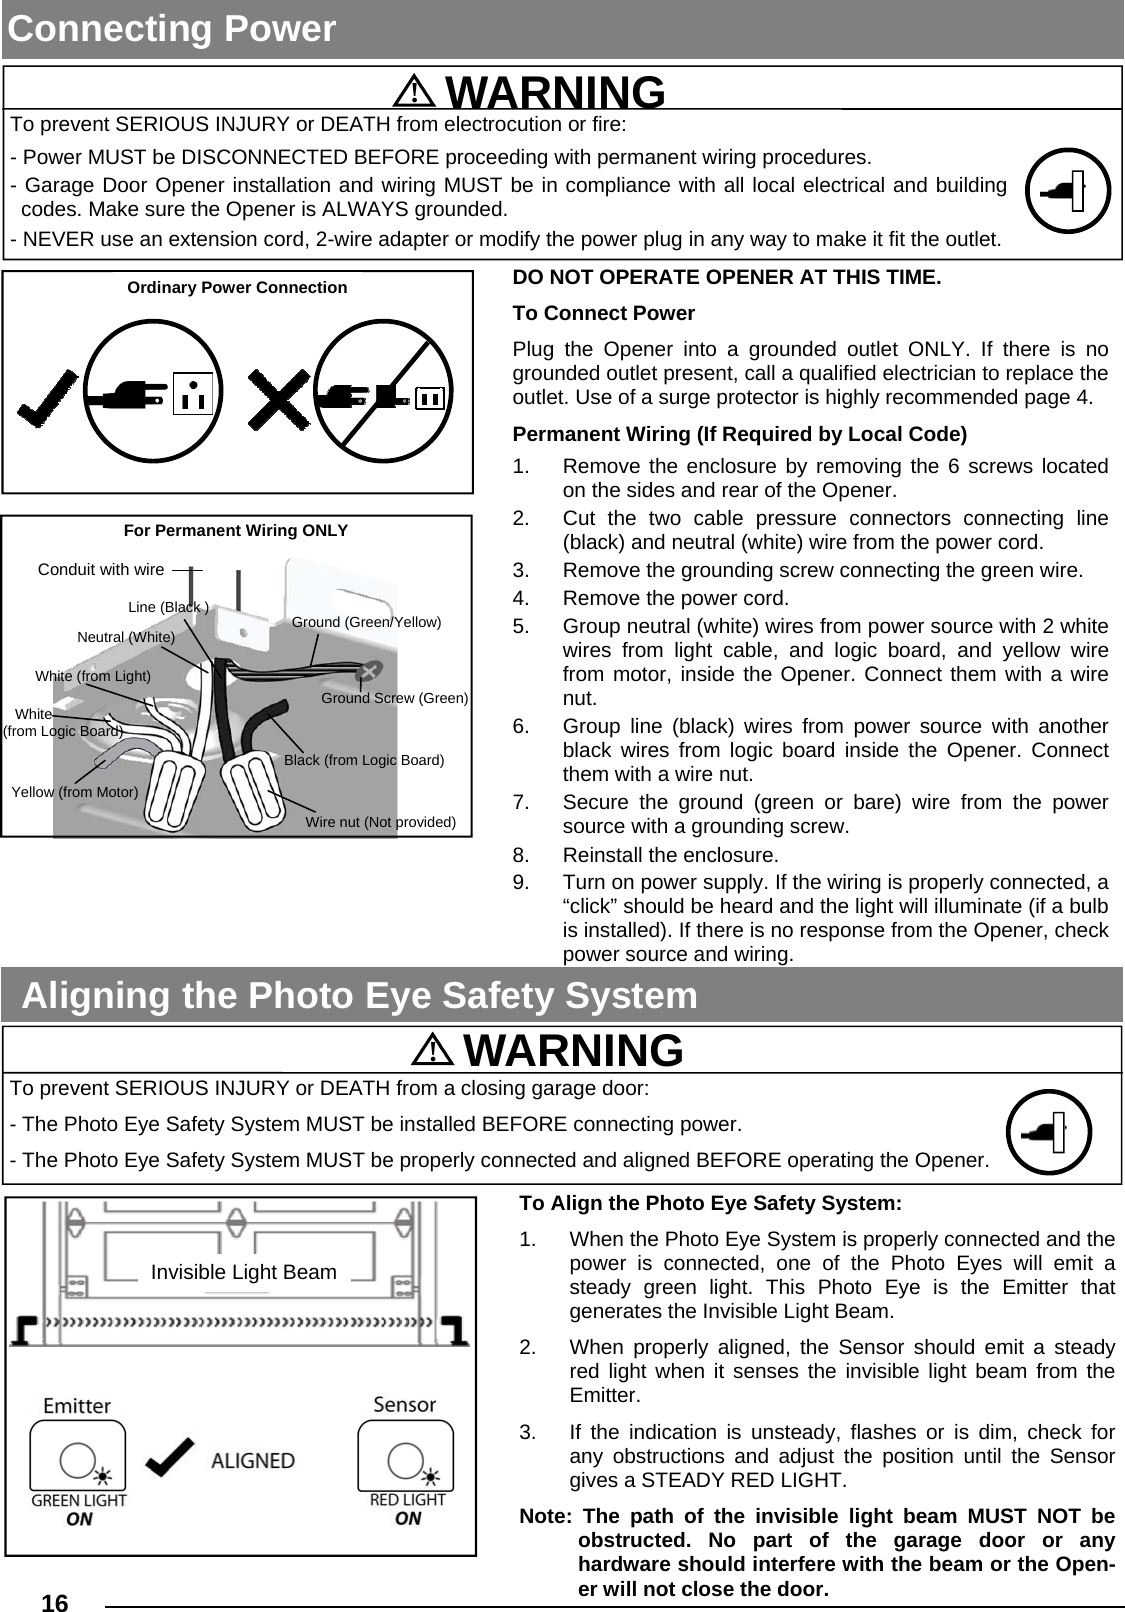   16  Connecting Power To Align the Photo Eye Safety System: 1.  When the Photo Eye System is properly connected and the power is connected, one of the Photo Eyes will emit a steady green light. This Photo Eye is the Emitter that     generates the Invisible Light Beam. 2.  When properly aligned, the Sensor should emit a steady red light when it senses the invisible light beam from the Emitter. 3.  If the indication is unsteady, flashes or is dim, check for any obstructions and adjust the position until the Sensor gives a STEADY RED LIGHT. Note: The path of the invisible light beam MUST NOT be  obstructed. No part of the garage door or any       hardware should interfere with the beam or the Open-er will not close the door. Aligning the Photo Eye Safety System  To prevent SERIOUS INJURY or DEATH from electrocution or fire: - Power MUST be DISCONNECTED BEFORE proceeding with permanent wiring procedures. - Garage Door Opener installation and wiring MUST be in compliance with all local electrical and building codes. Make sure the Opener is ALWAYS grounded. - NEVER use an extension cord, 2-wire adapter or modify the power plug in any way to make it fit the outlet.  To prevent SERIOUS INJURY or DEATH from a closing garage door: - The Photo Eye Safety System MUST be installed BEFORE connecting power. - The Photo Eye Safety System MUST be properly connected and aligned BEFORE operating the Opener. !  WARNING !  WARNING Invisible Light Beam Ordinary Power Connection For Permanent Wiring ONLY Conduit with wire Yellow (from Motor) White (from Light) Neutral (White) Wire nut (Not provided)    White  (from Logic Board) Line (Black ) Ground (Green/Yellow) Black (from Logic Board) Ground Screw (Green) DO NOT OPERATE OPENER AT THIS TIME. To Connect Power Plug the Opener into a grounded outlet ONLY. If there is no grounded outlet present, call a qualified electrician to replace the outlet. Use of a surge protector is highly recommended page 4.  Permanent Wiring (If Required by Local Code) 1.  Remove the enclosure by removing the 6 screws located on the sides and rear of the Opener. 2.  Cut the two cable pressure connectors connecting line (black) and neutral (white) wire from the power cord. 3.  Remove the grounding screw connecting the green wire. 4.  Remove the power cord. 5.  Group neutral (white) wires from power source with 2 white wires from light cable, and logic board, and yellow wire from motor, inside the Opener. Connect them with a wire nut. 6.  Group line (black) wires from power source with another black wires from logic board inside the Opener. Connect them with a wire nut. 7.  Secure the ground (green or bare) wire from the power source with a grounding screw. 8. Reinstall the enclosure. 9.  Turn on power supply. If the wiring is properly connected, a “click” should be heard and the light will illuminate (if a bulb is installed). If there is no response from the Opener, check power source and wiring. 